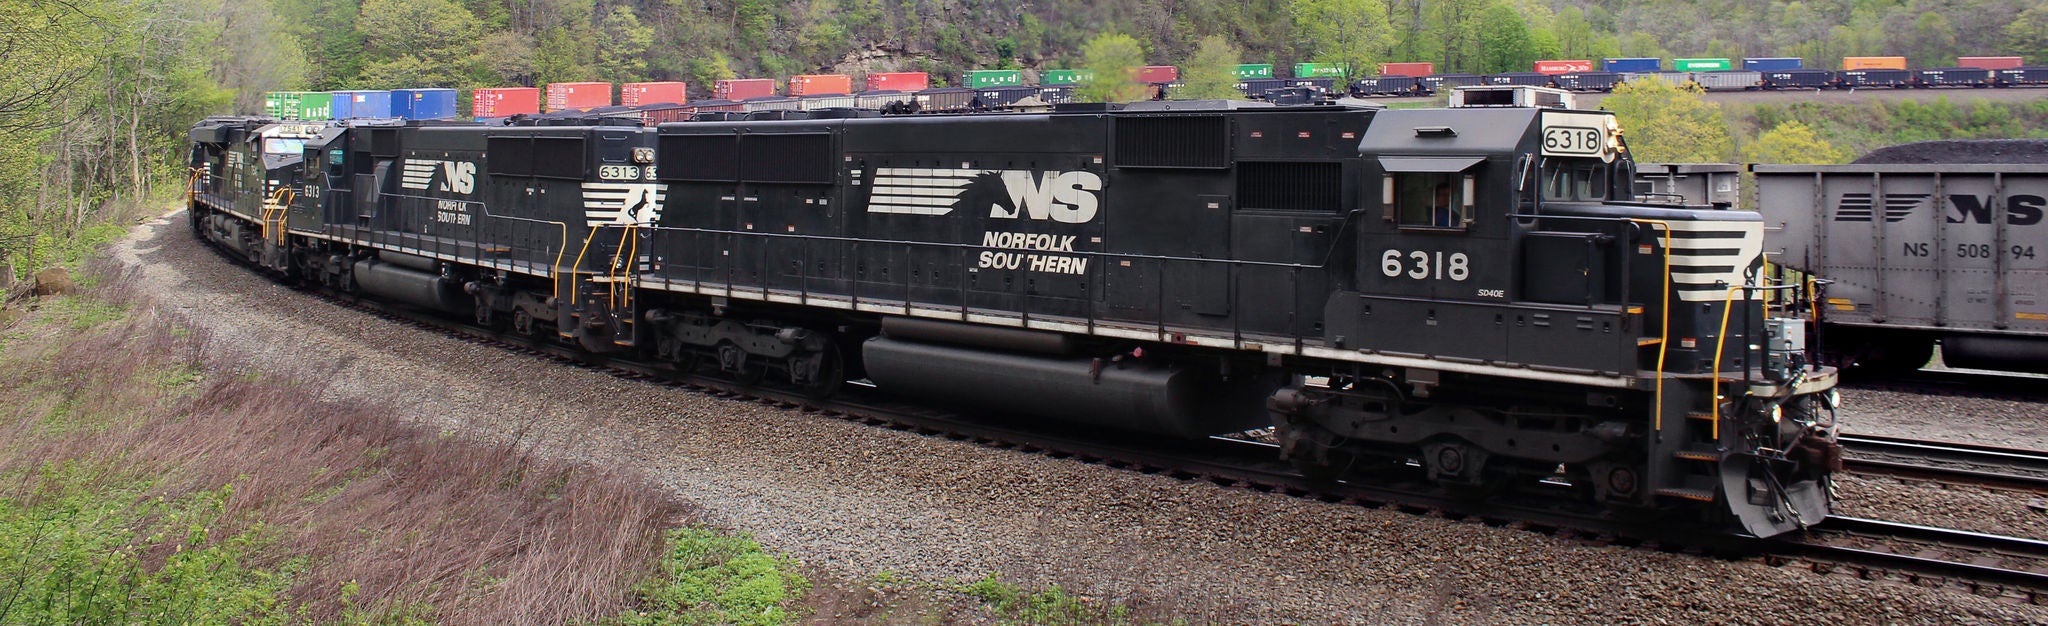 3 ns engines and double stack Intermodal cars